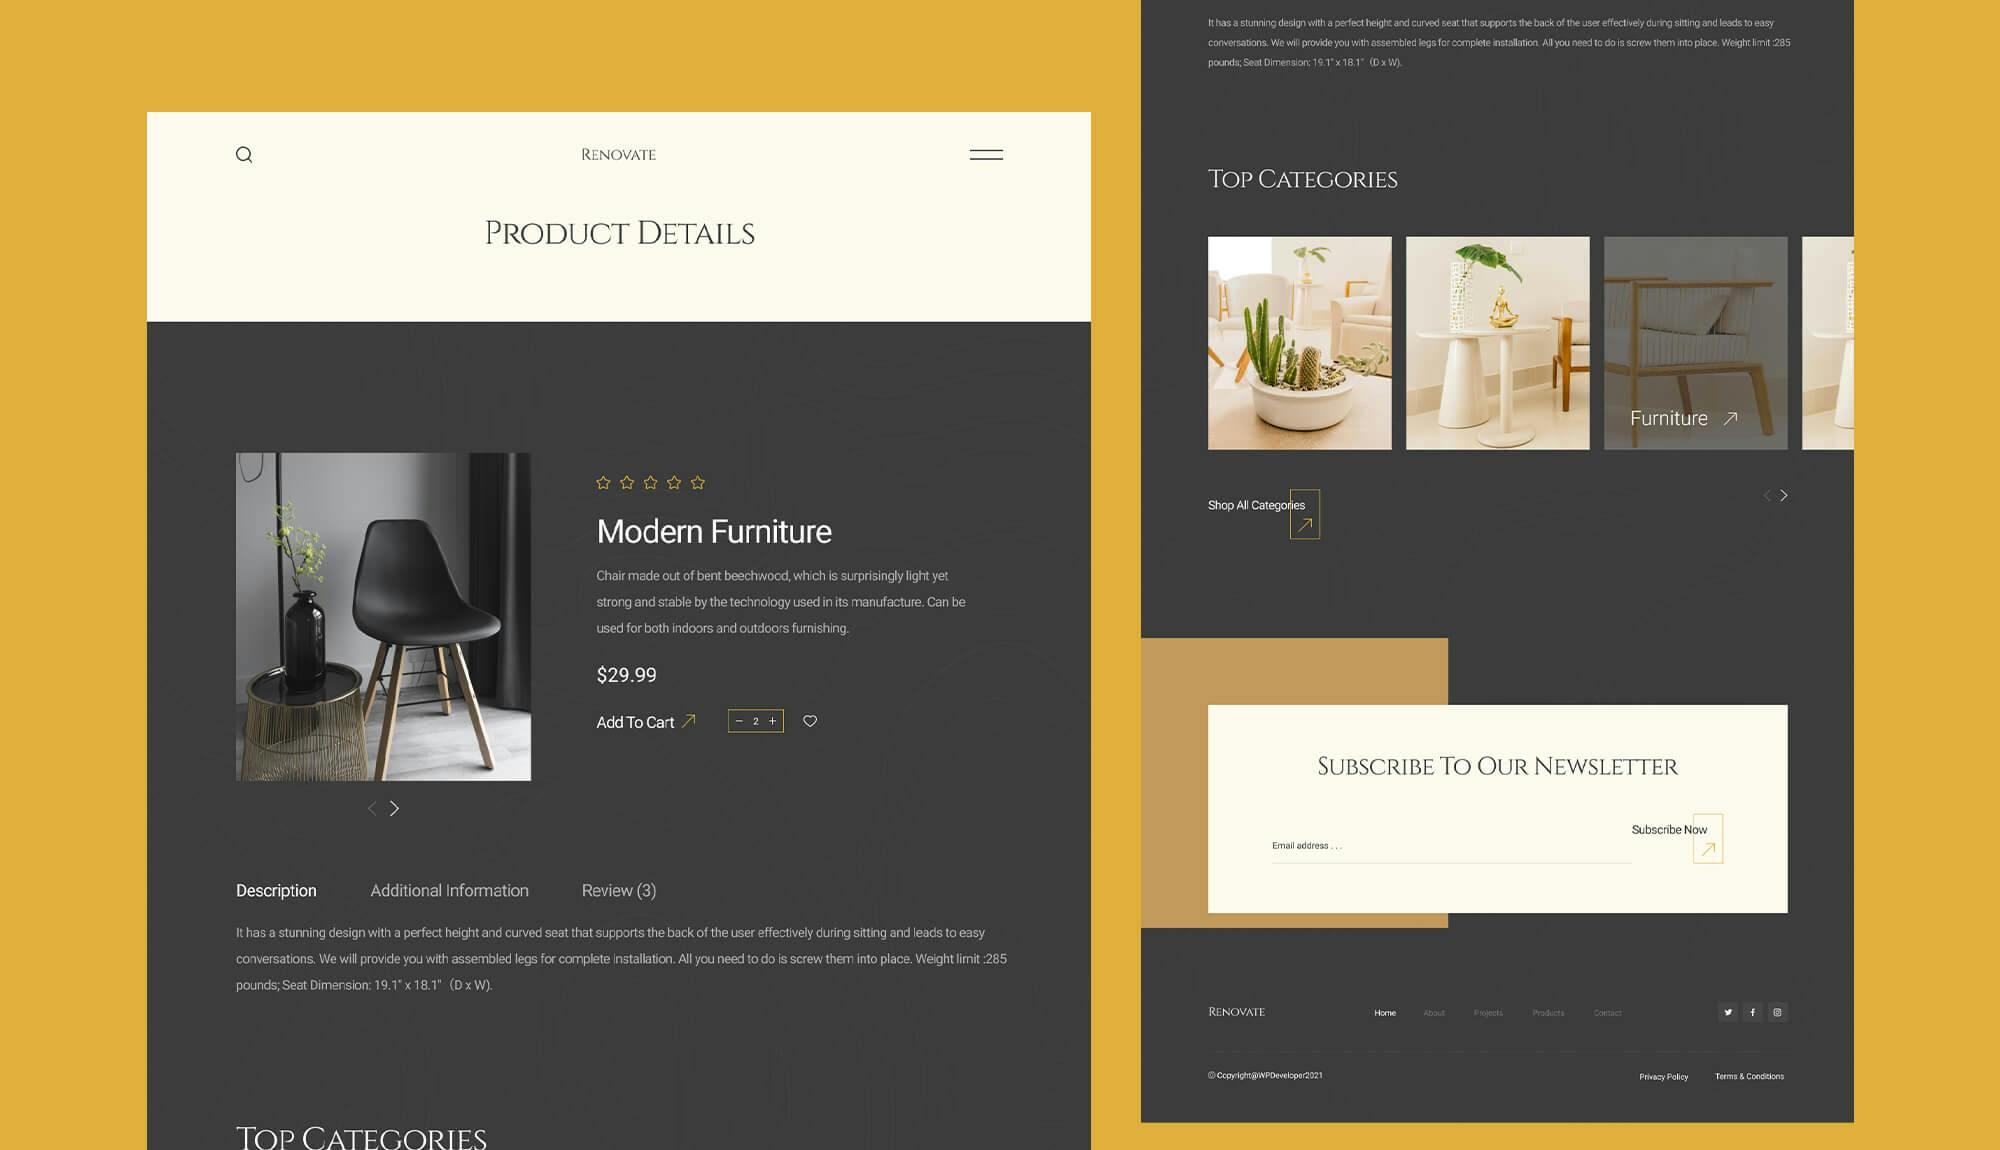 Renovate Single Product Page Banner